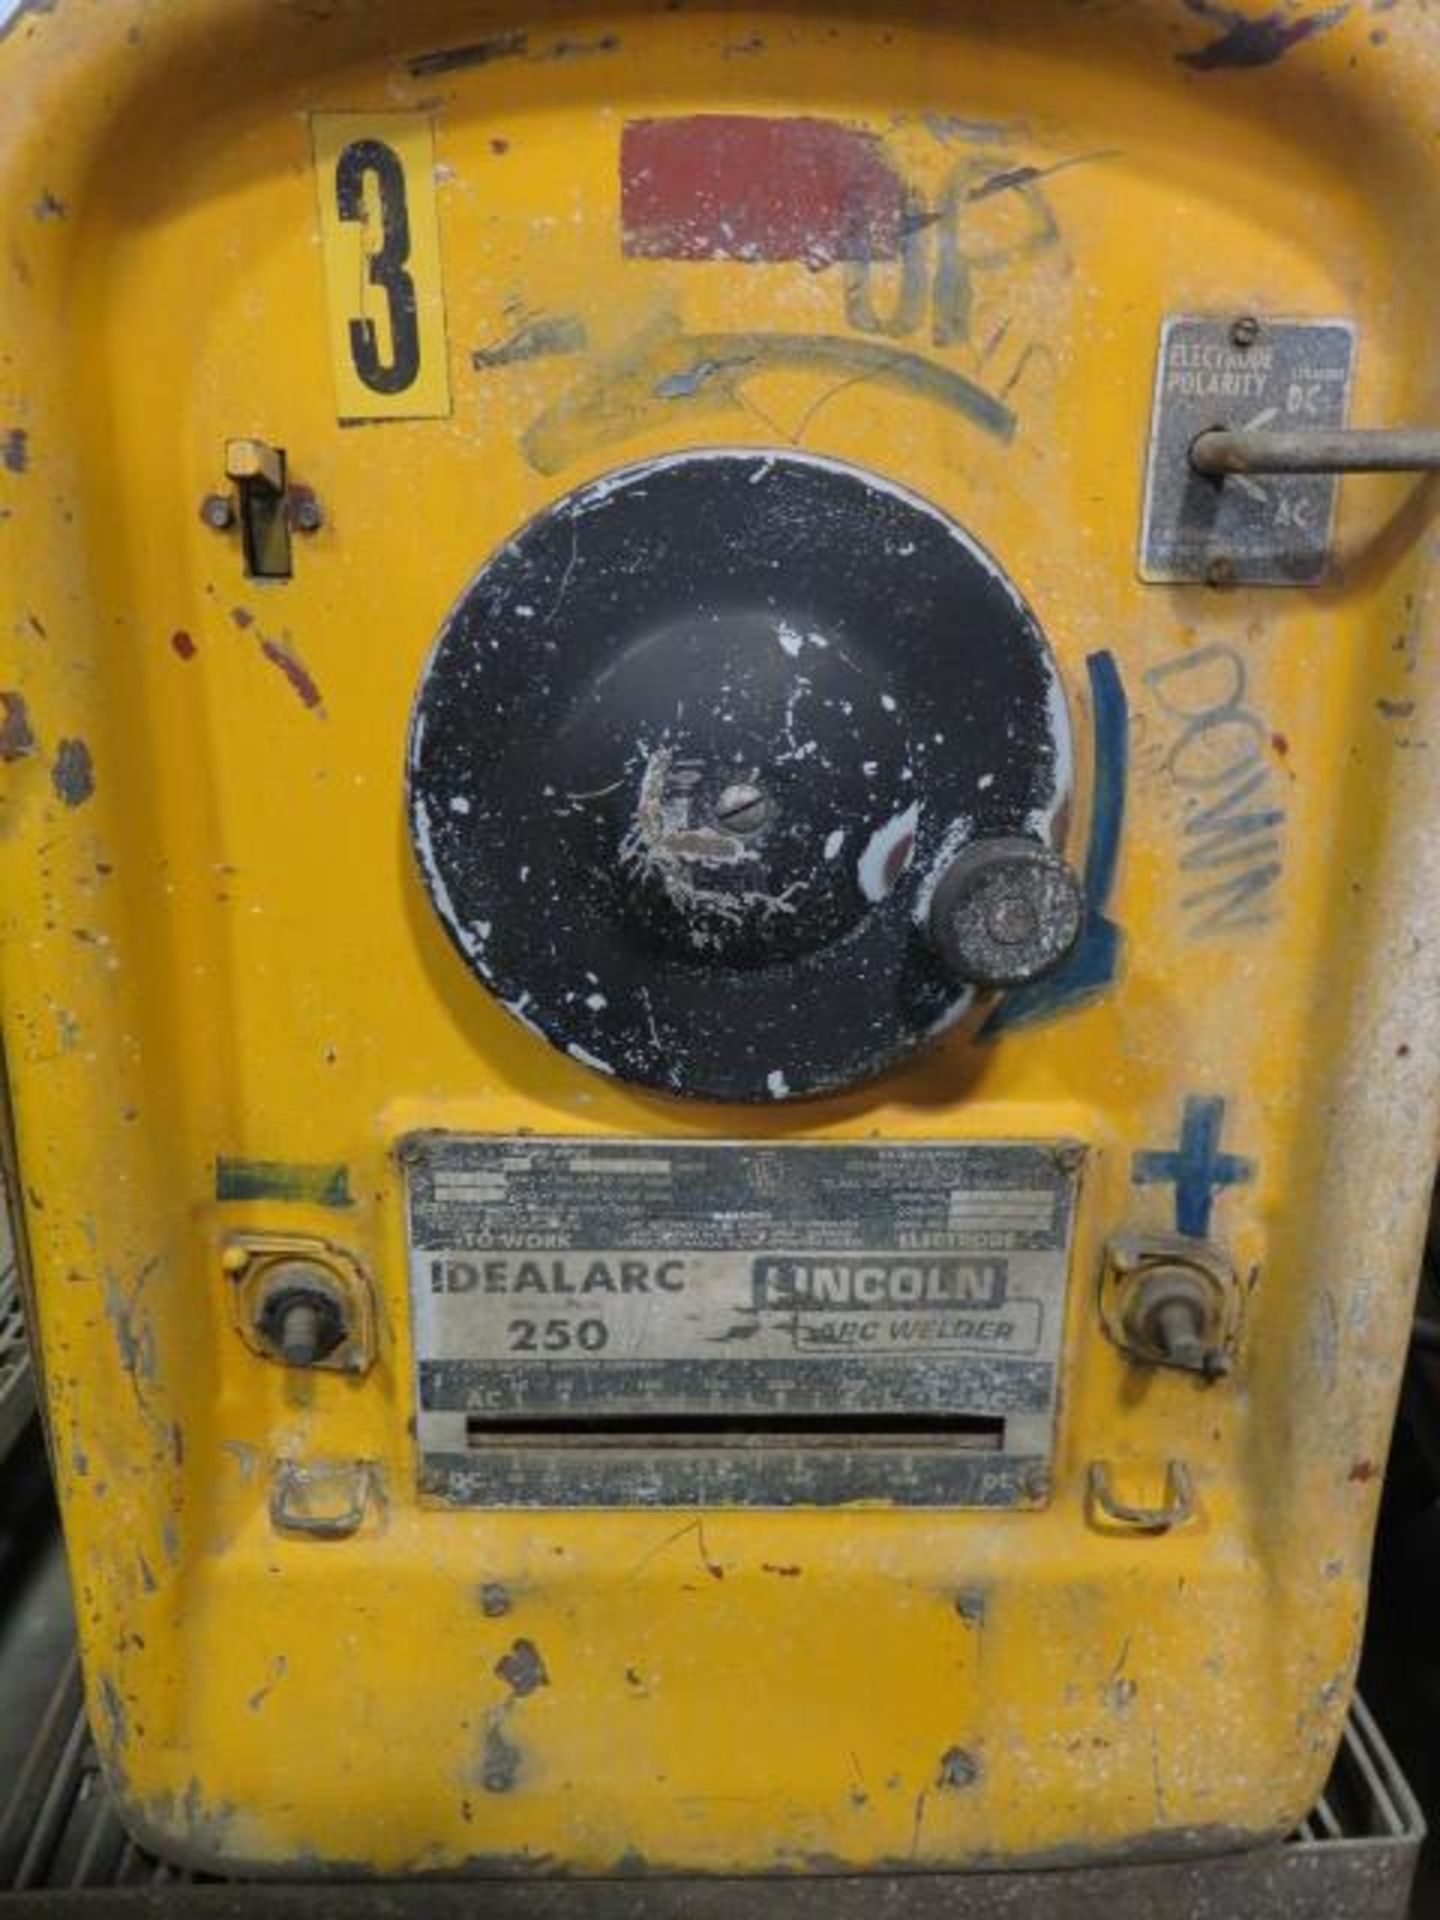 Lincoln Idealarc 250 Arc Welding Power Source (SOLD AS-IS - NO WARRANTY) - Image 3 of 11